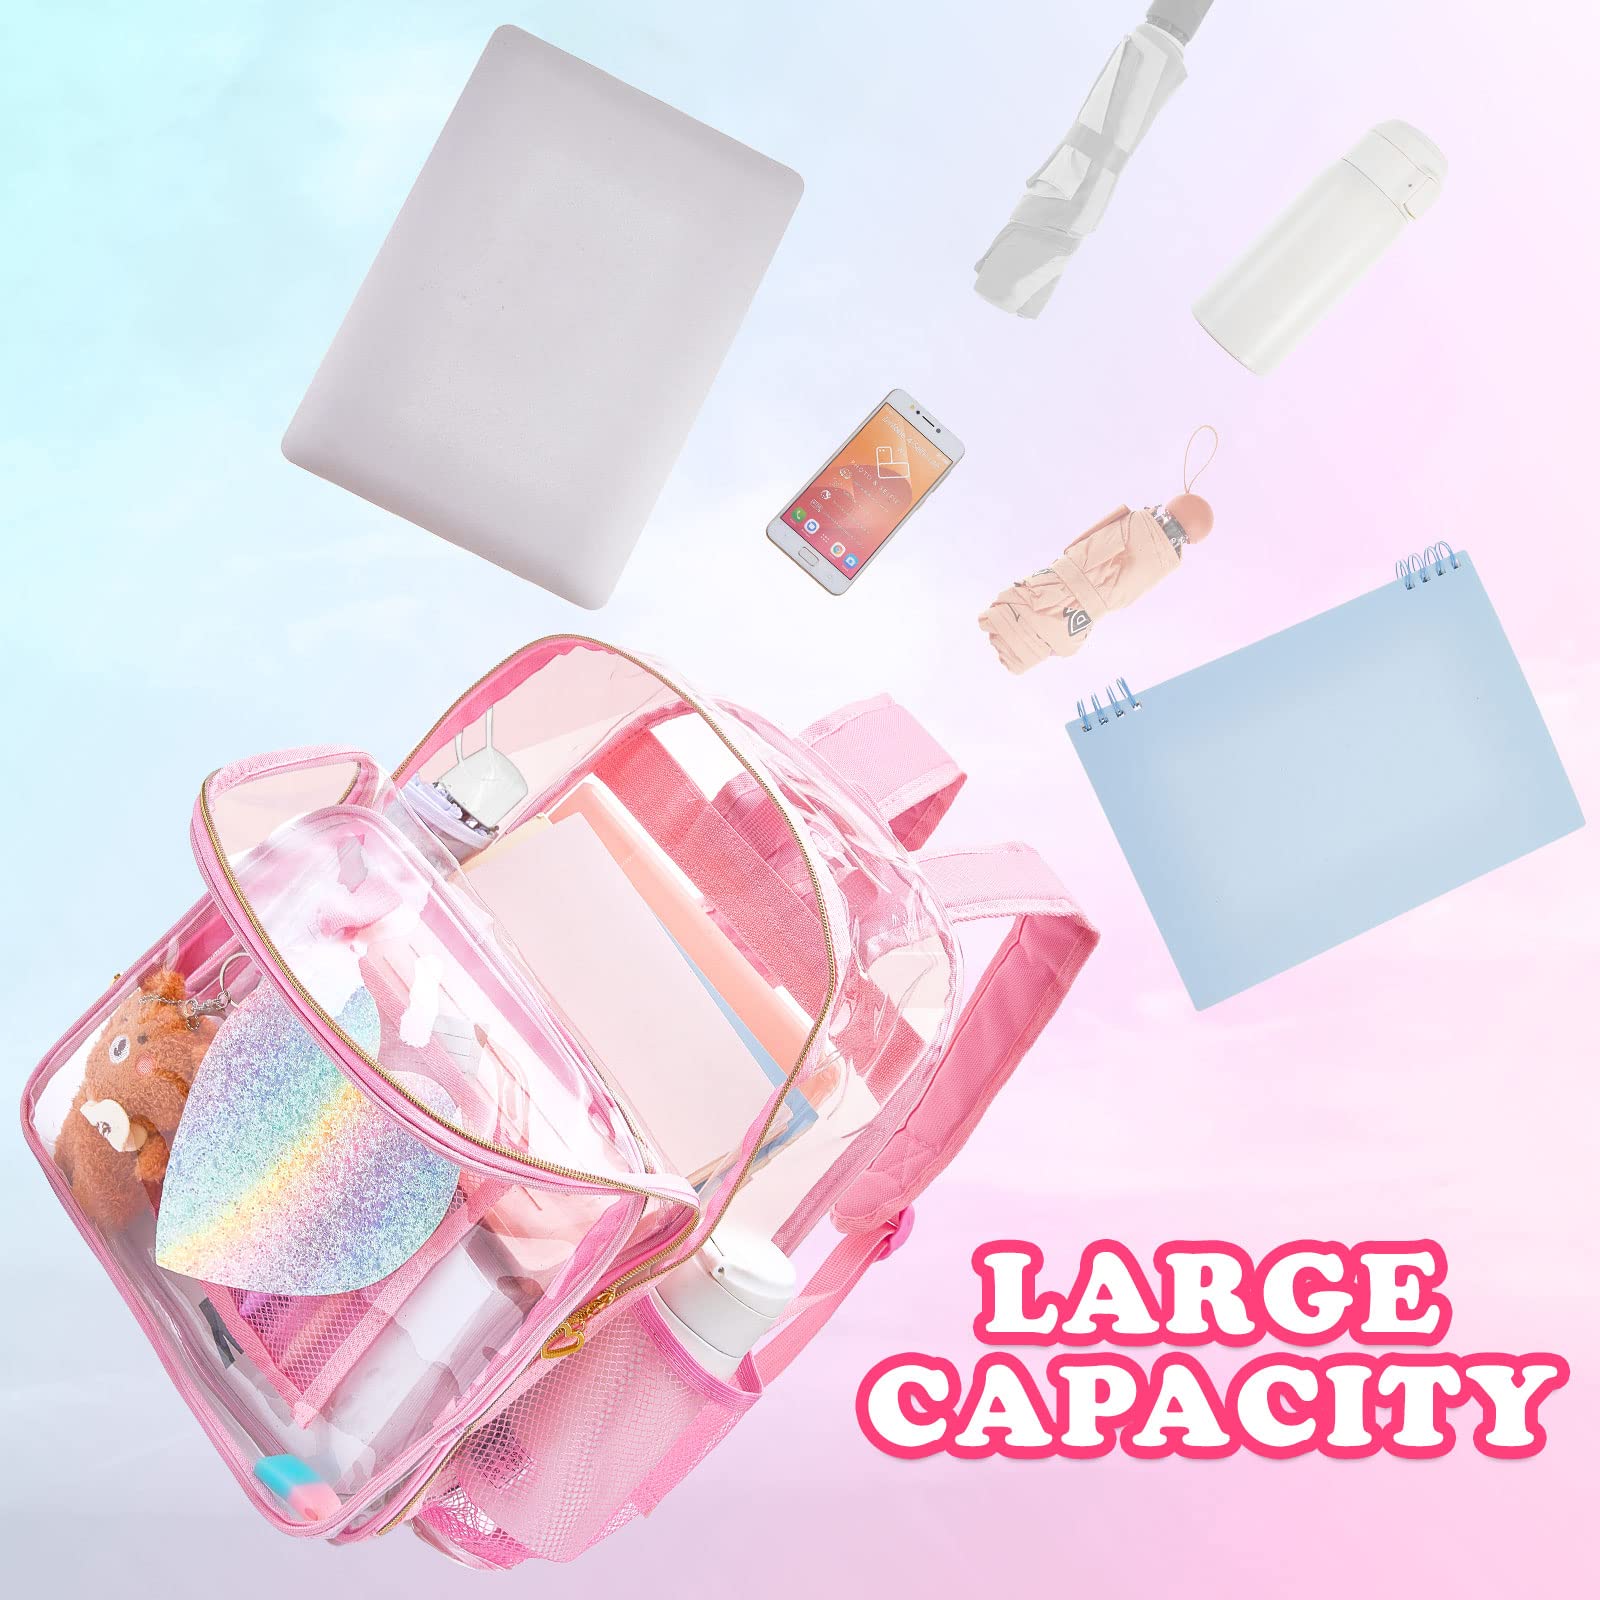 Eccliy Clear Backpack Stadium Approved Backpack 3 School Backpack for Girls Boys Christmas Clear Backpack Girls Boys Backpack